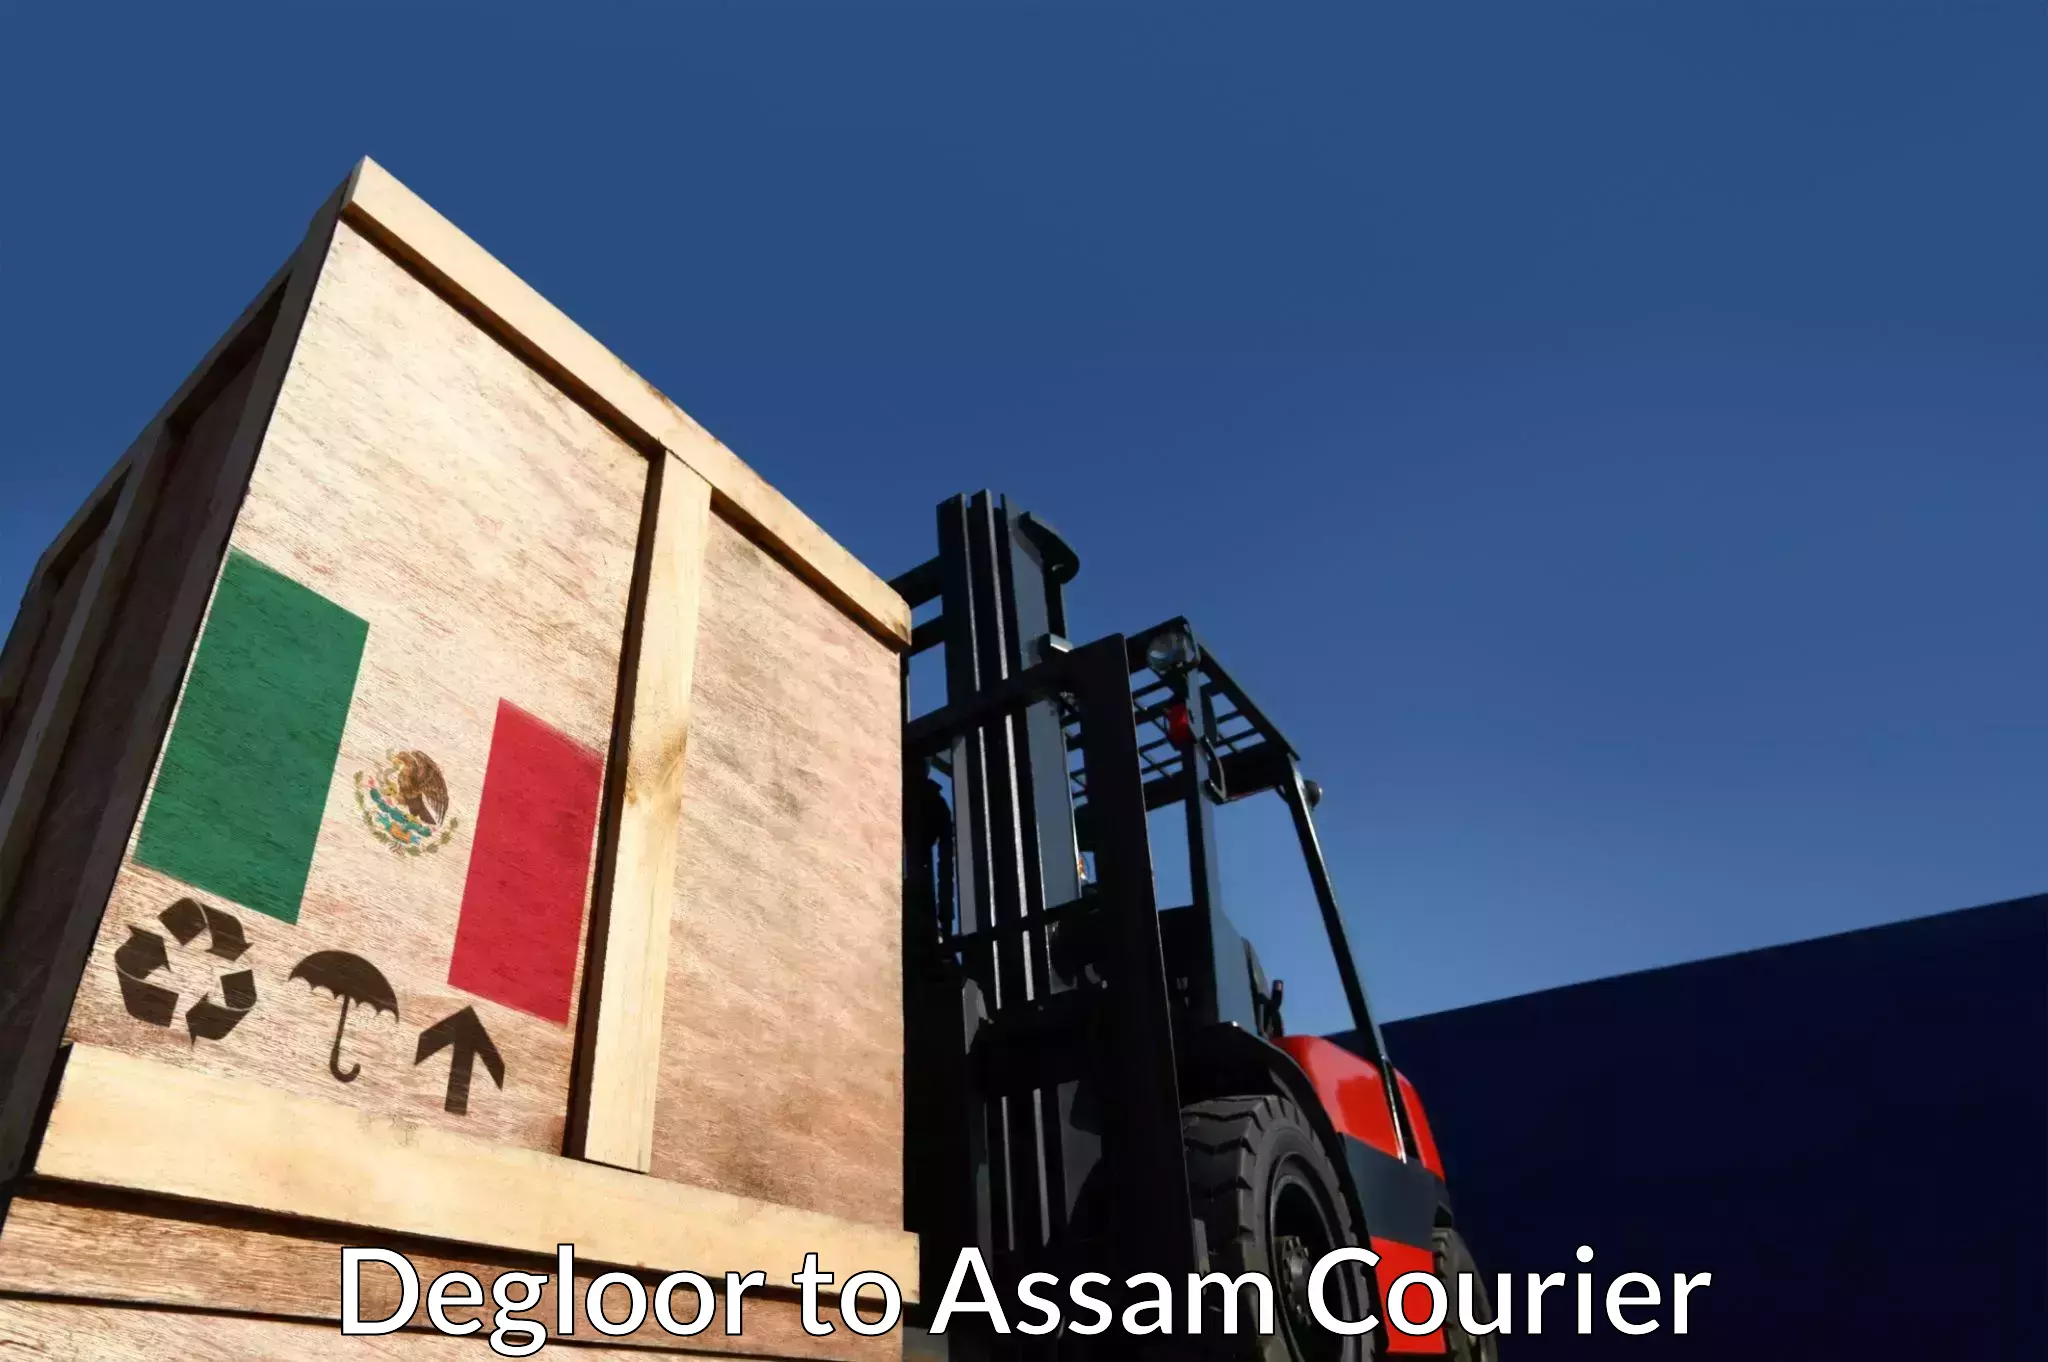 Local delivery service Degloor to Assam